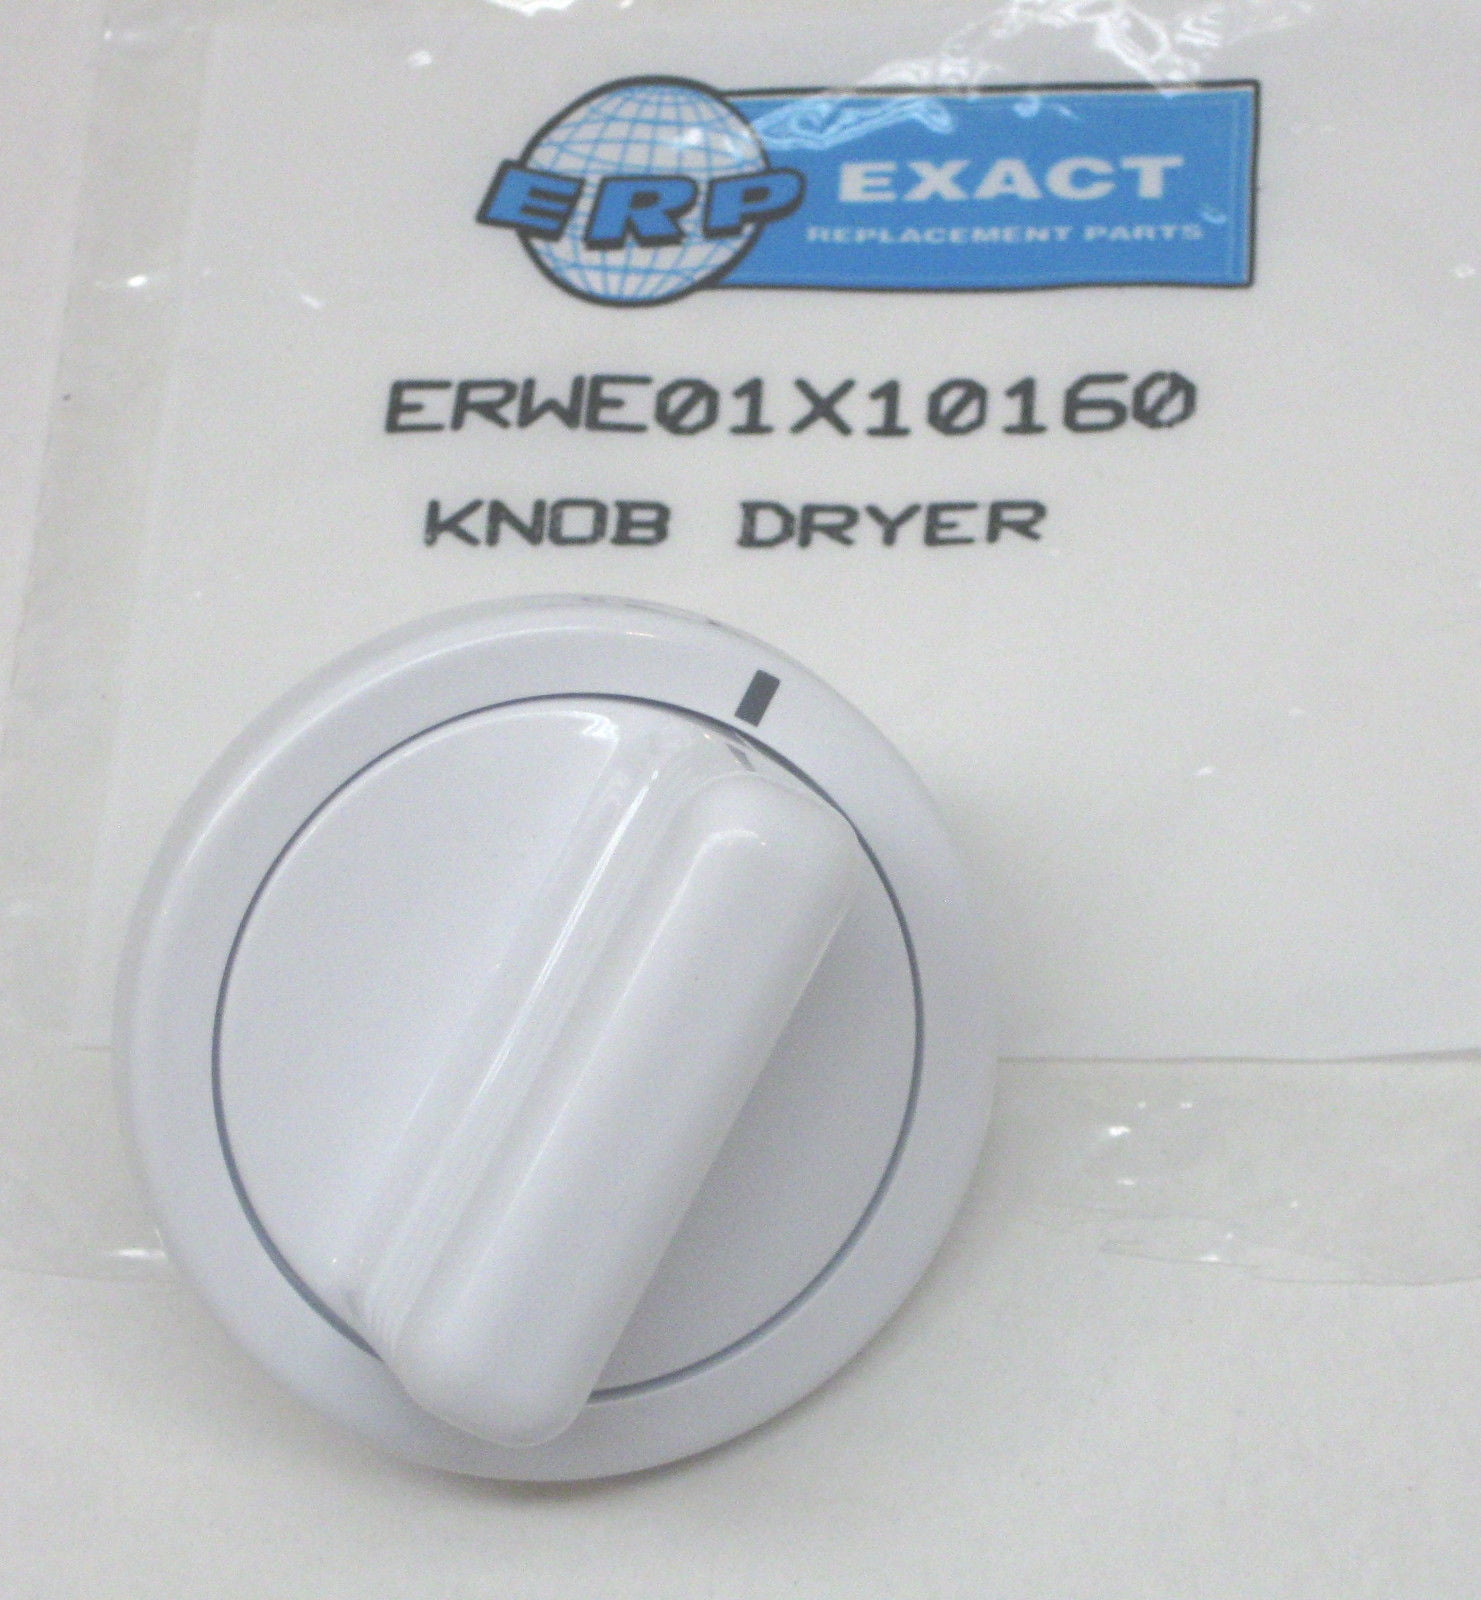 2pcs of Dryer Timer Control Knob for GE AP3207448 PS755794 WE01X10160 